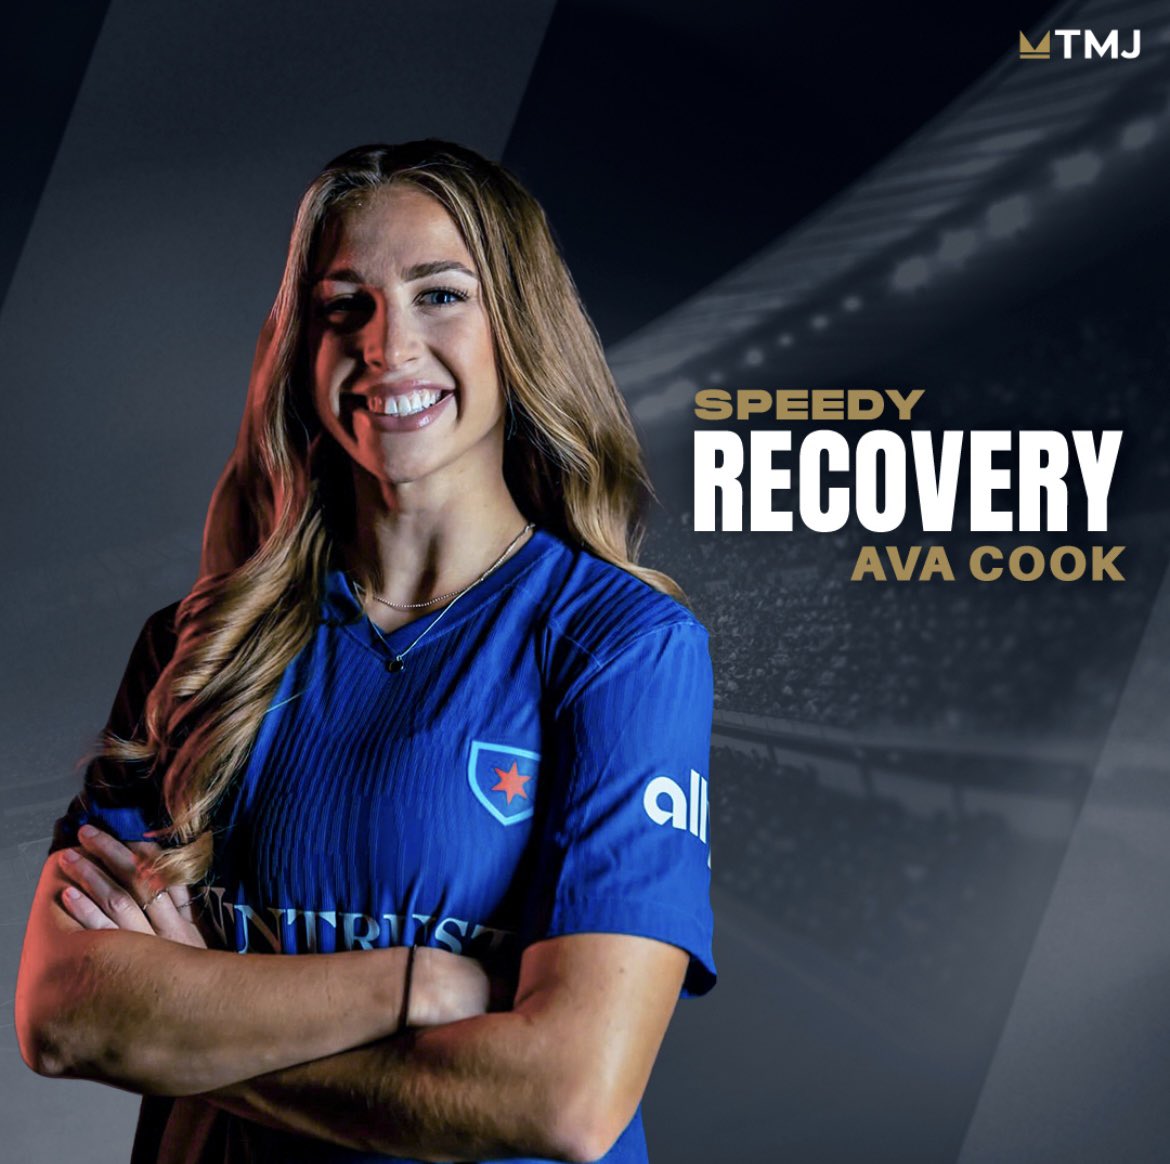 ✨ Wishing a speedy recovery to #TMJAthlete Ava Cook @avaaaaa We’ll be waiting for your comeback 🙏